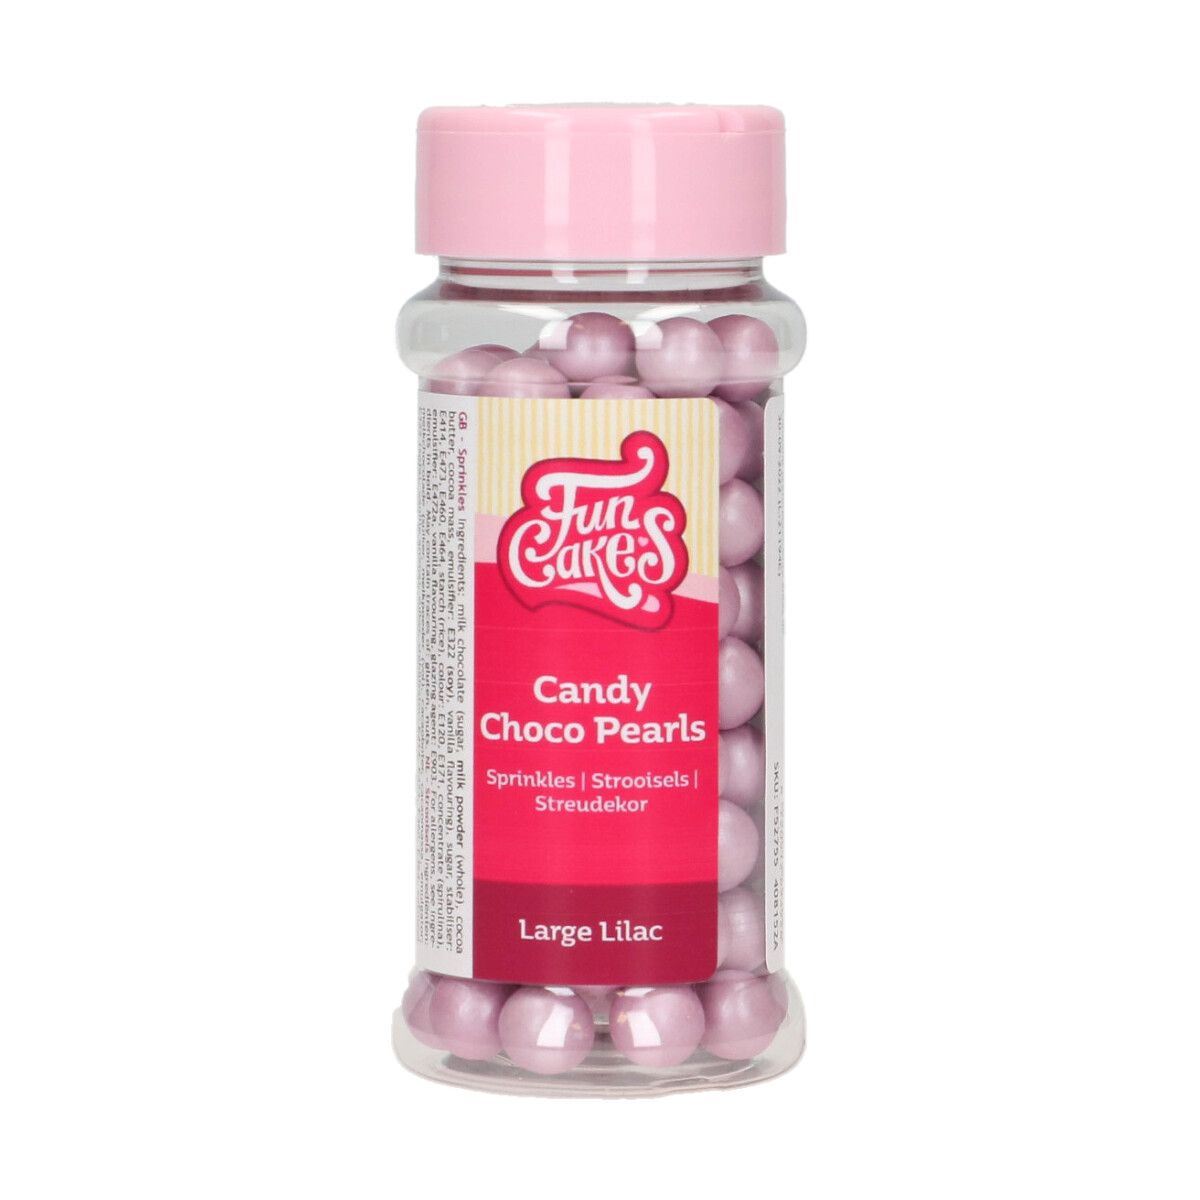 FC Candy Choco Pearls - Lilac Large